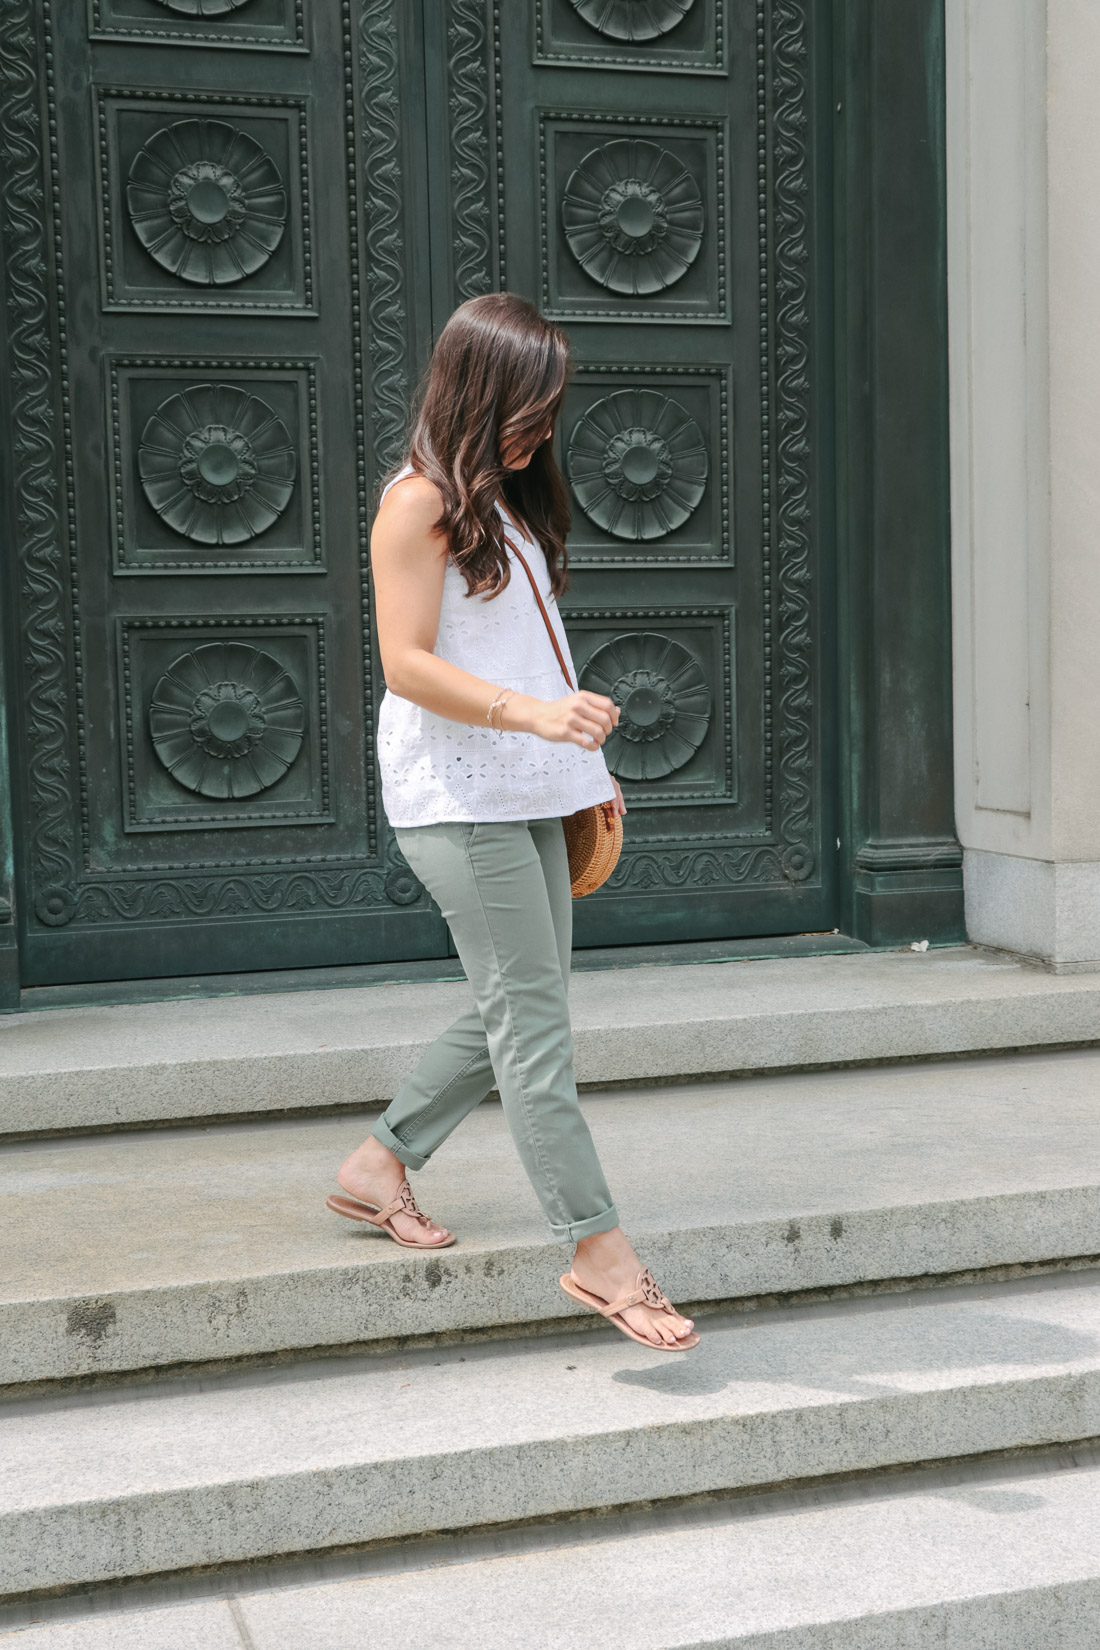 Eyelet tank top and girlfriend chinos from LOFT